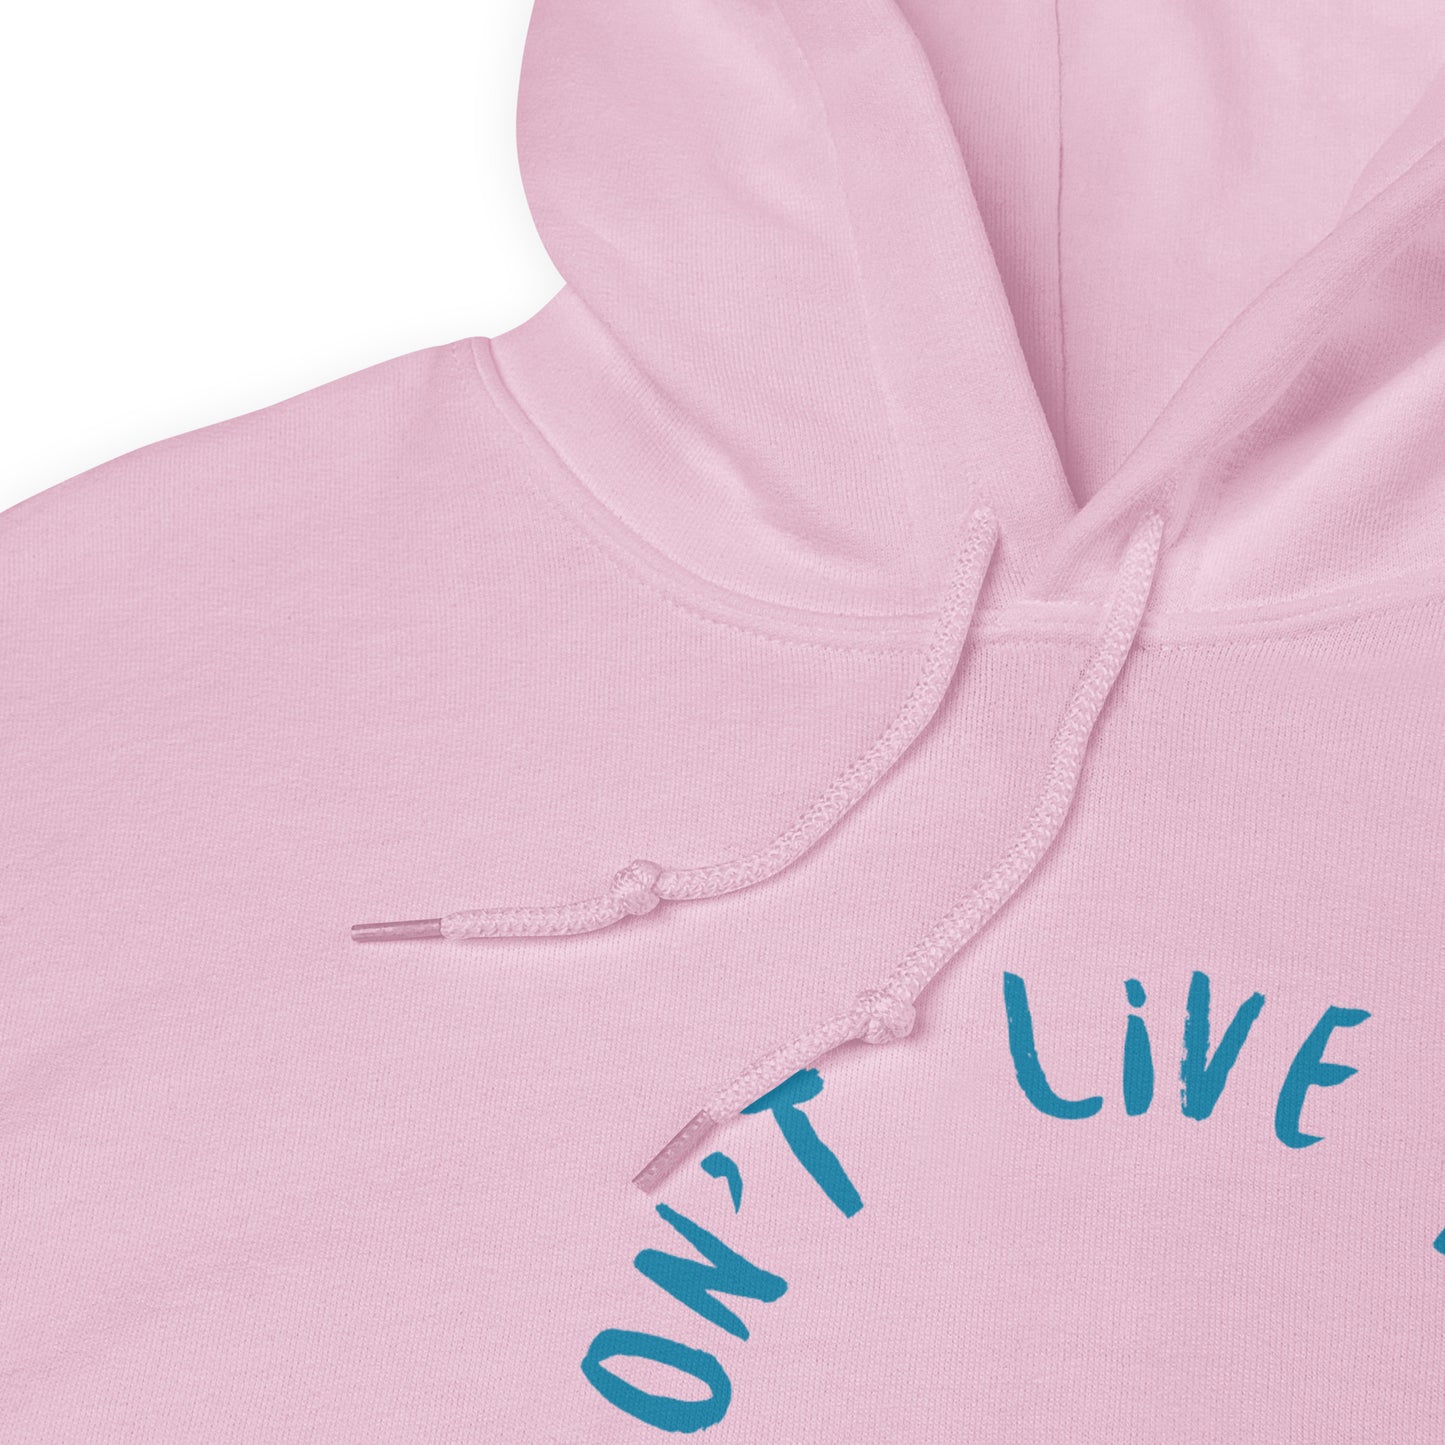 Don't Live Life in a Comfort Zone Unisex Hoodie